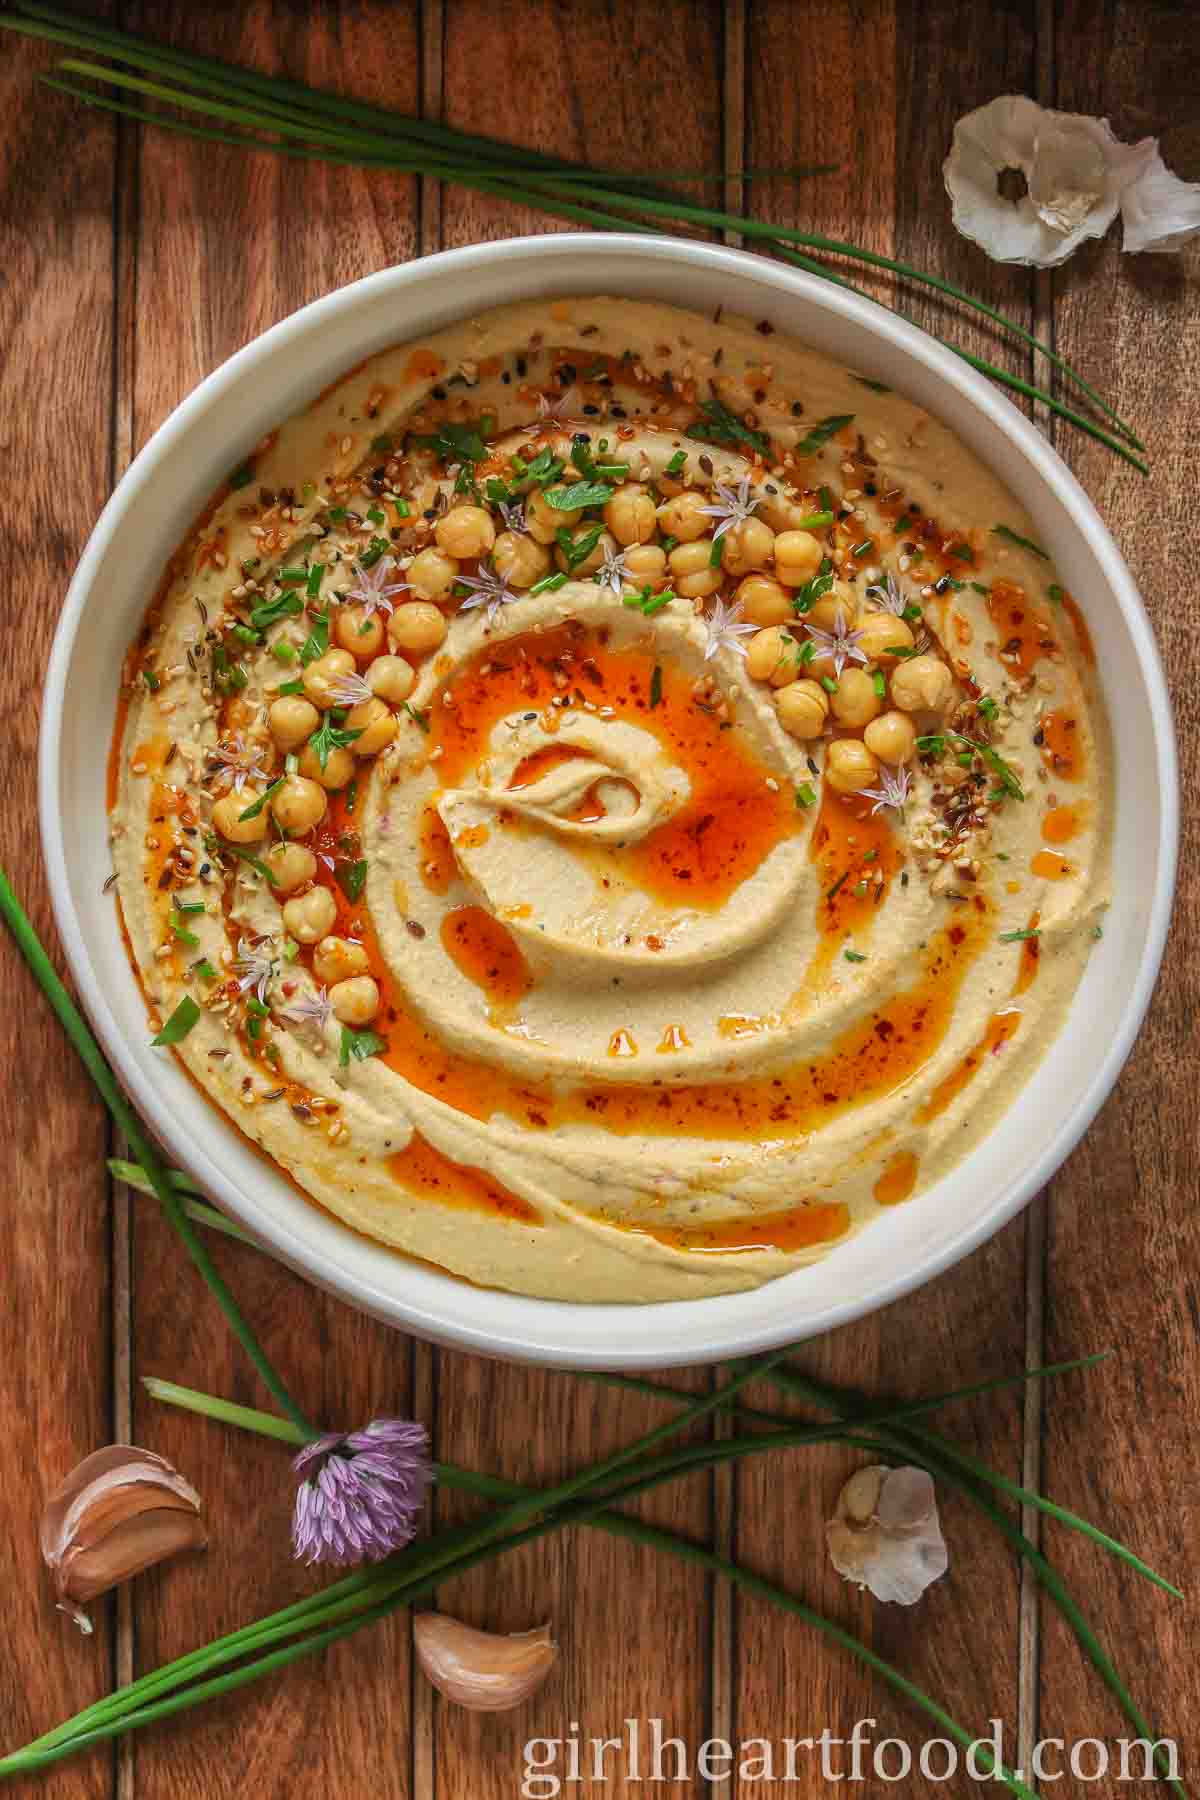 Bowl of roasted garlic hummus garnished with toppings, next to chives and garlic cloves.